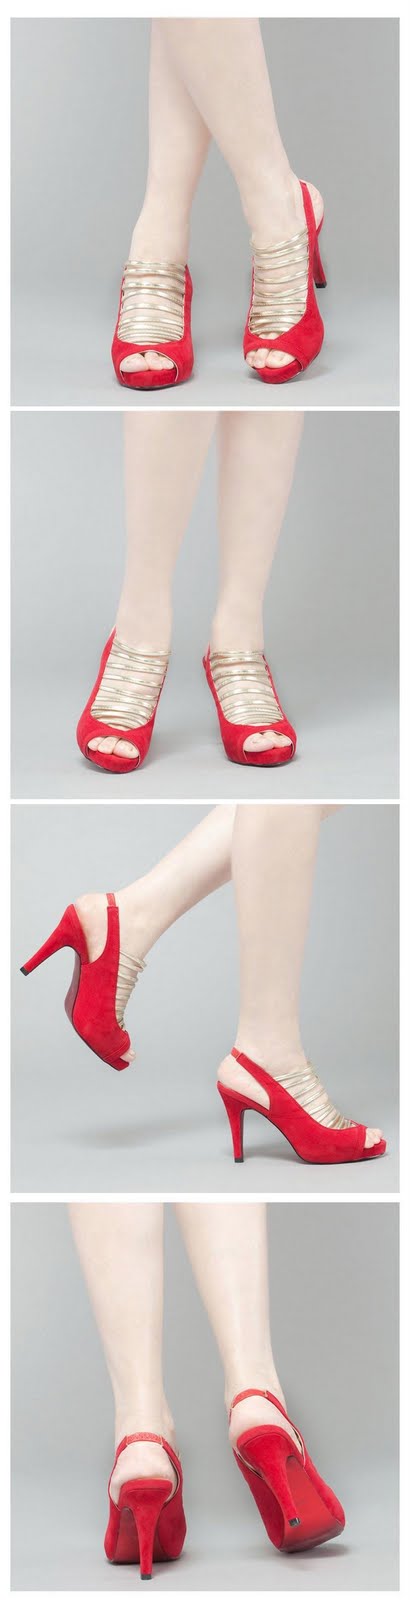  Hot Red Shoes For Spring Parties